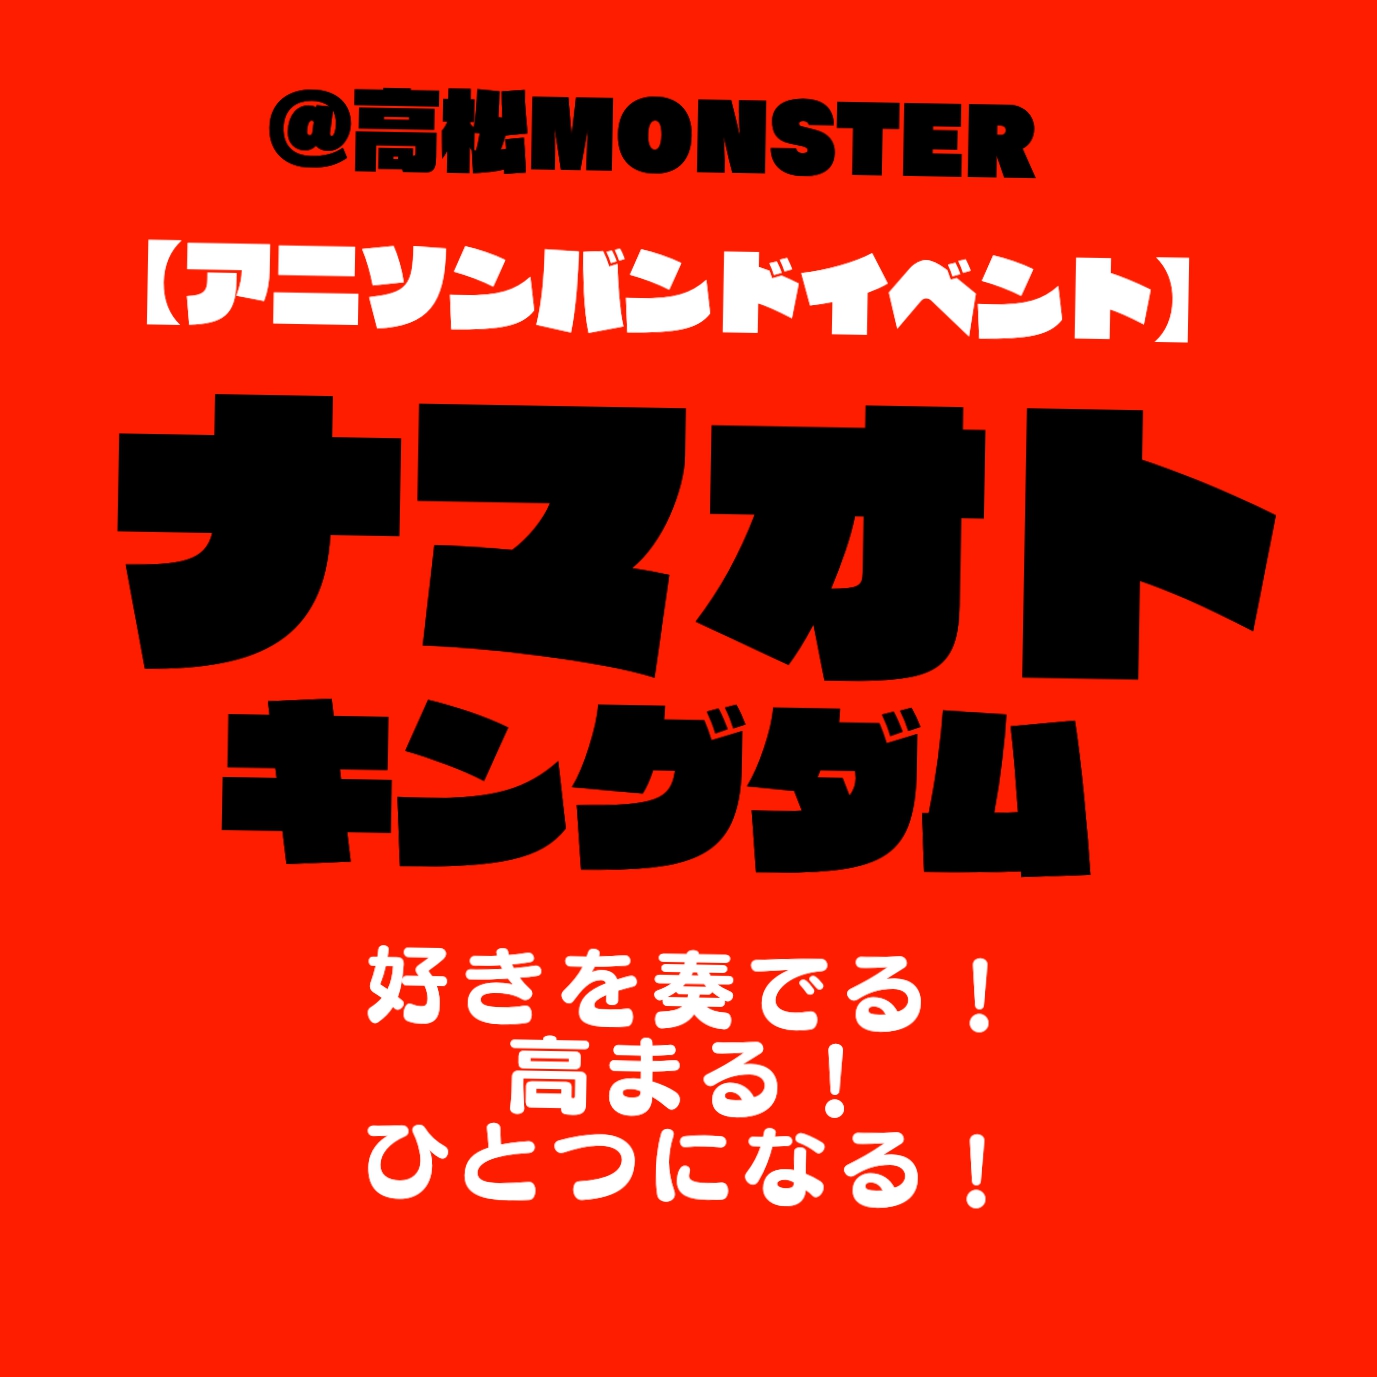 <br />
<b>Warning</b>:  Use of undefined constant the_title - assumed 'the_title' (this will throw an Error in a future version of PHP) in <b>/home/takamatsumonster/www/wp-content/themes/monster/cat_schedule.php</b> on line <b>172</b><br />
